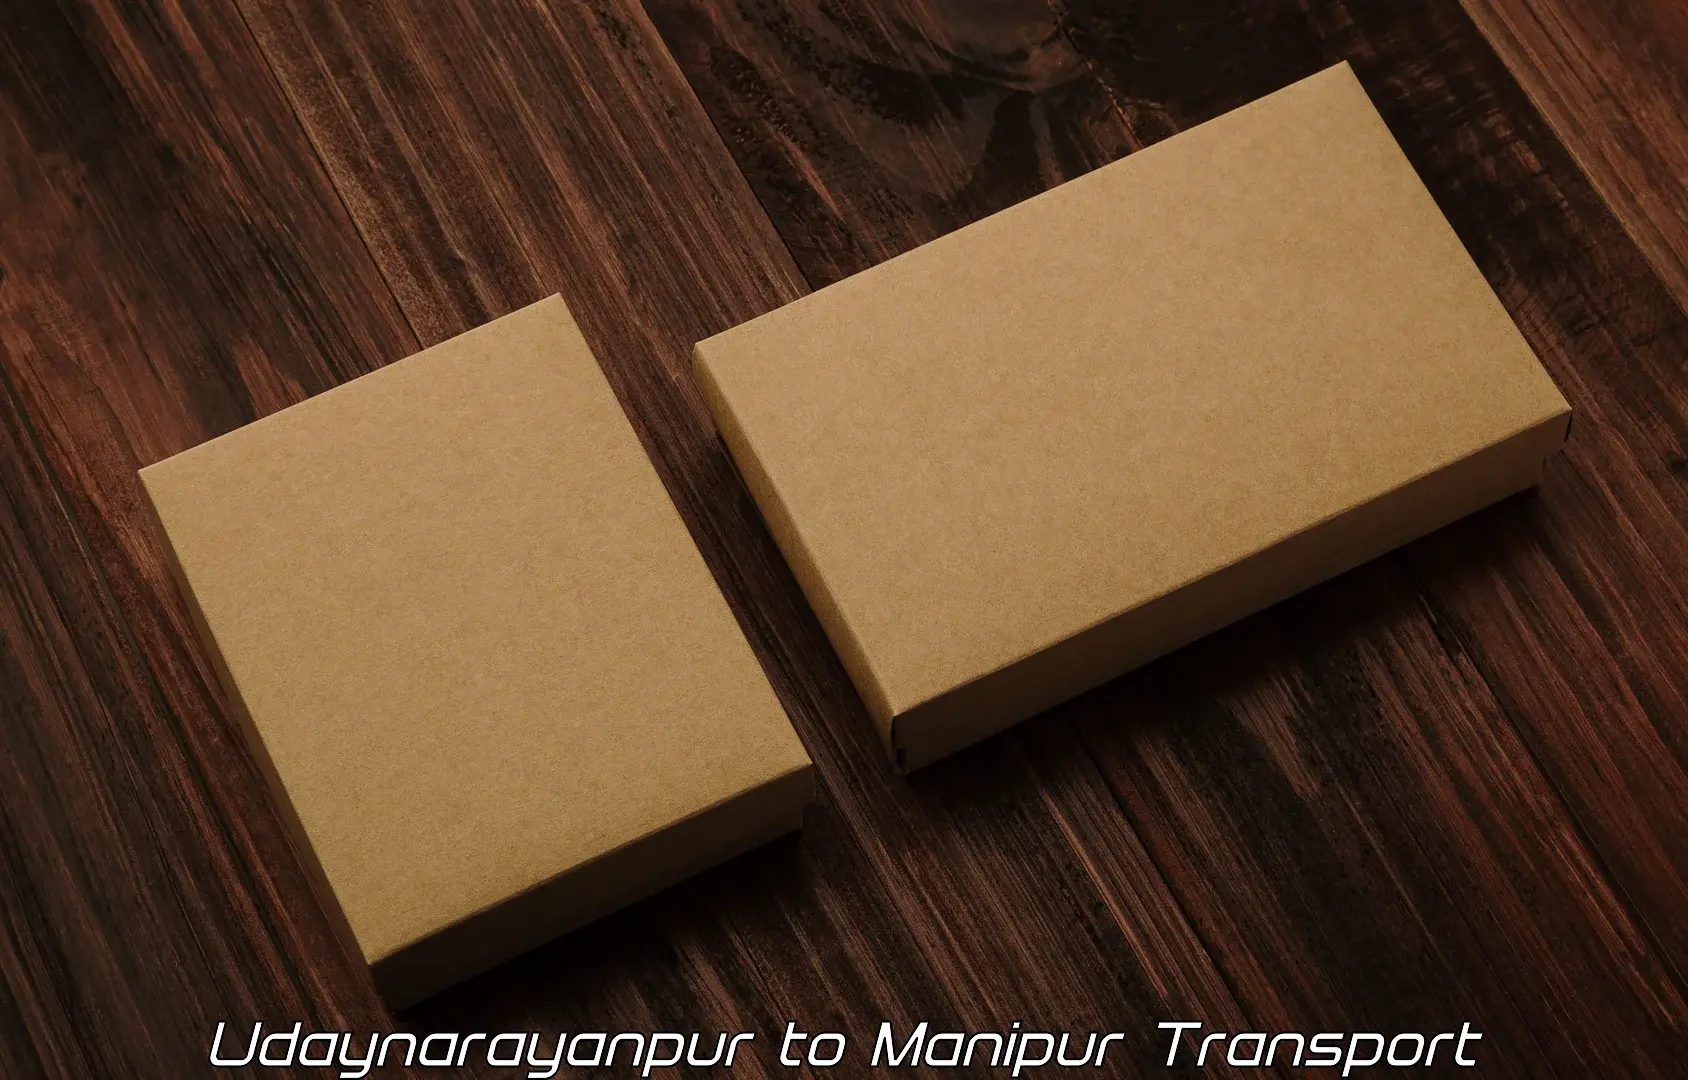 Container transport service Udaynarayanpur to Manipur